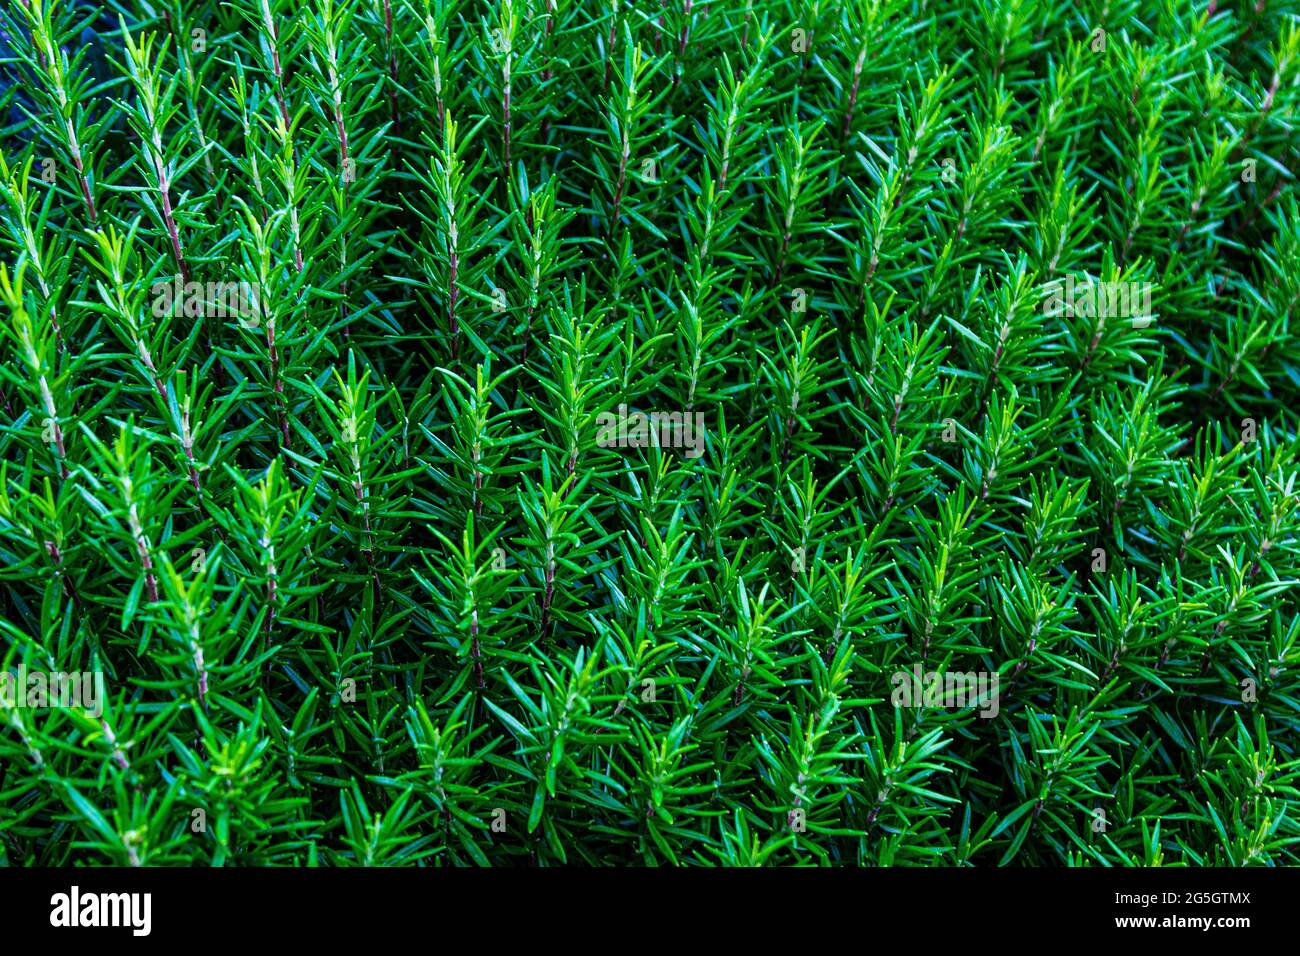 Thick plants. Plant texture. Plant sprouts. Thick grass. Stock Photo